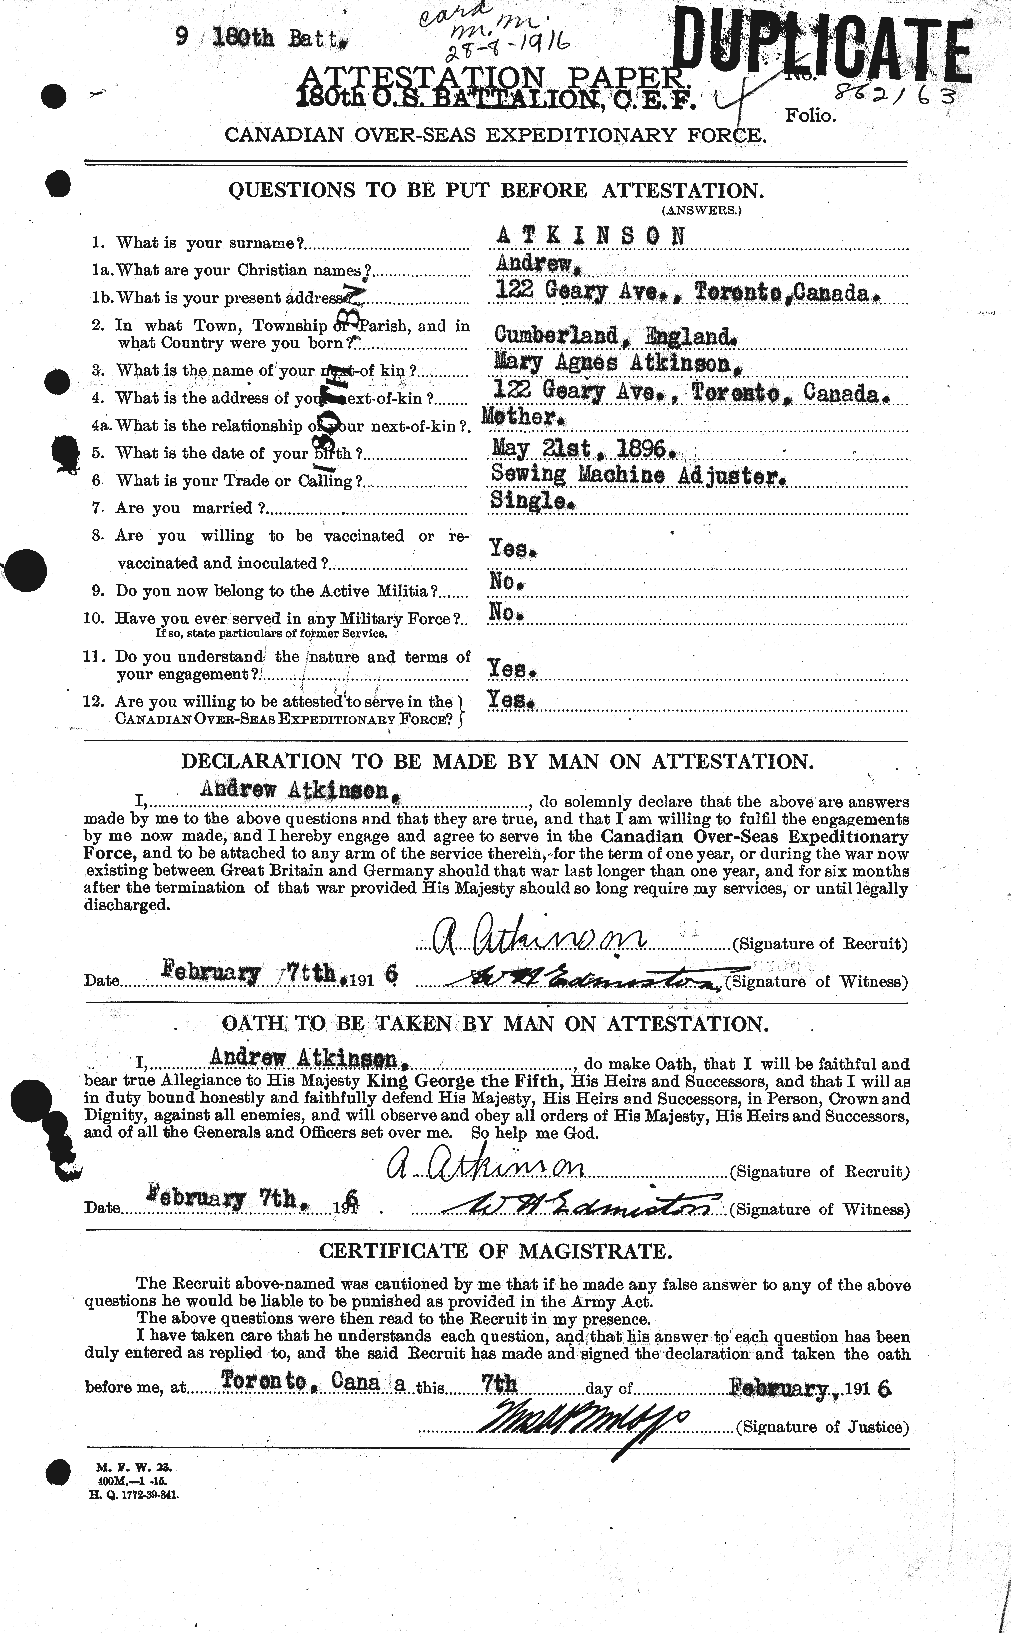 Personnel Records of the First World War - CEF 217575a